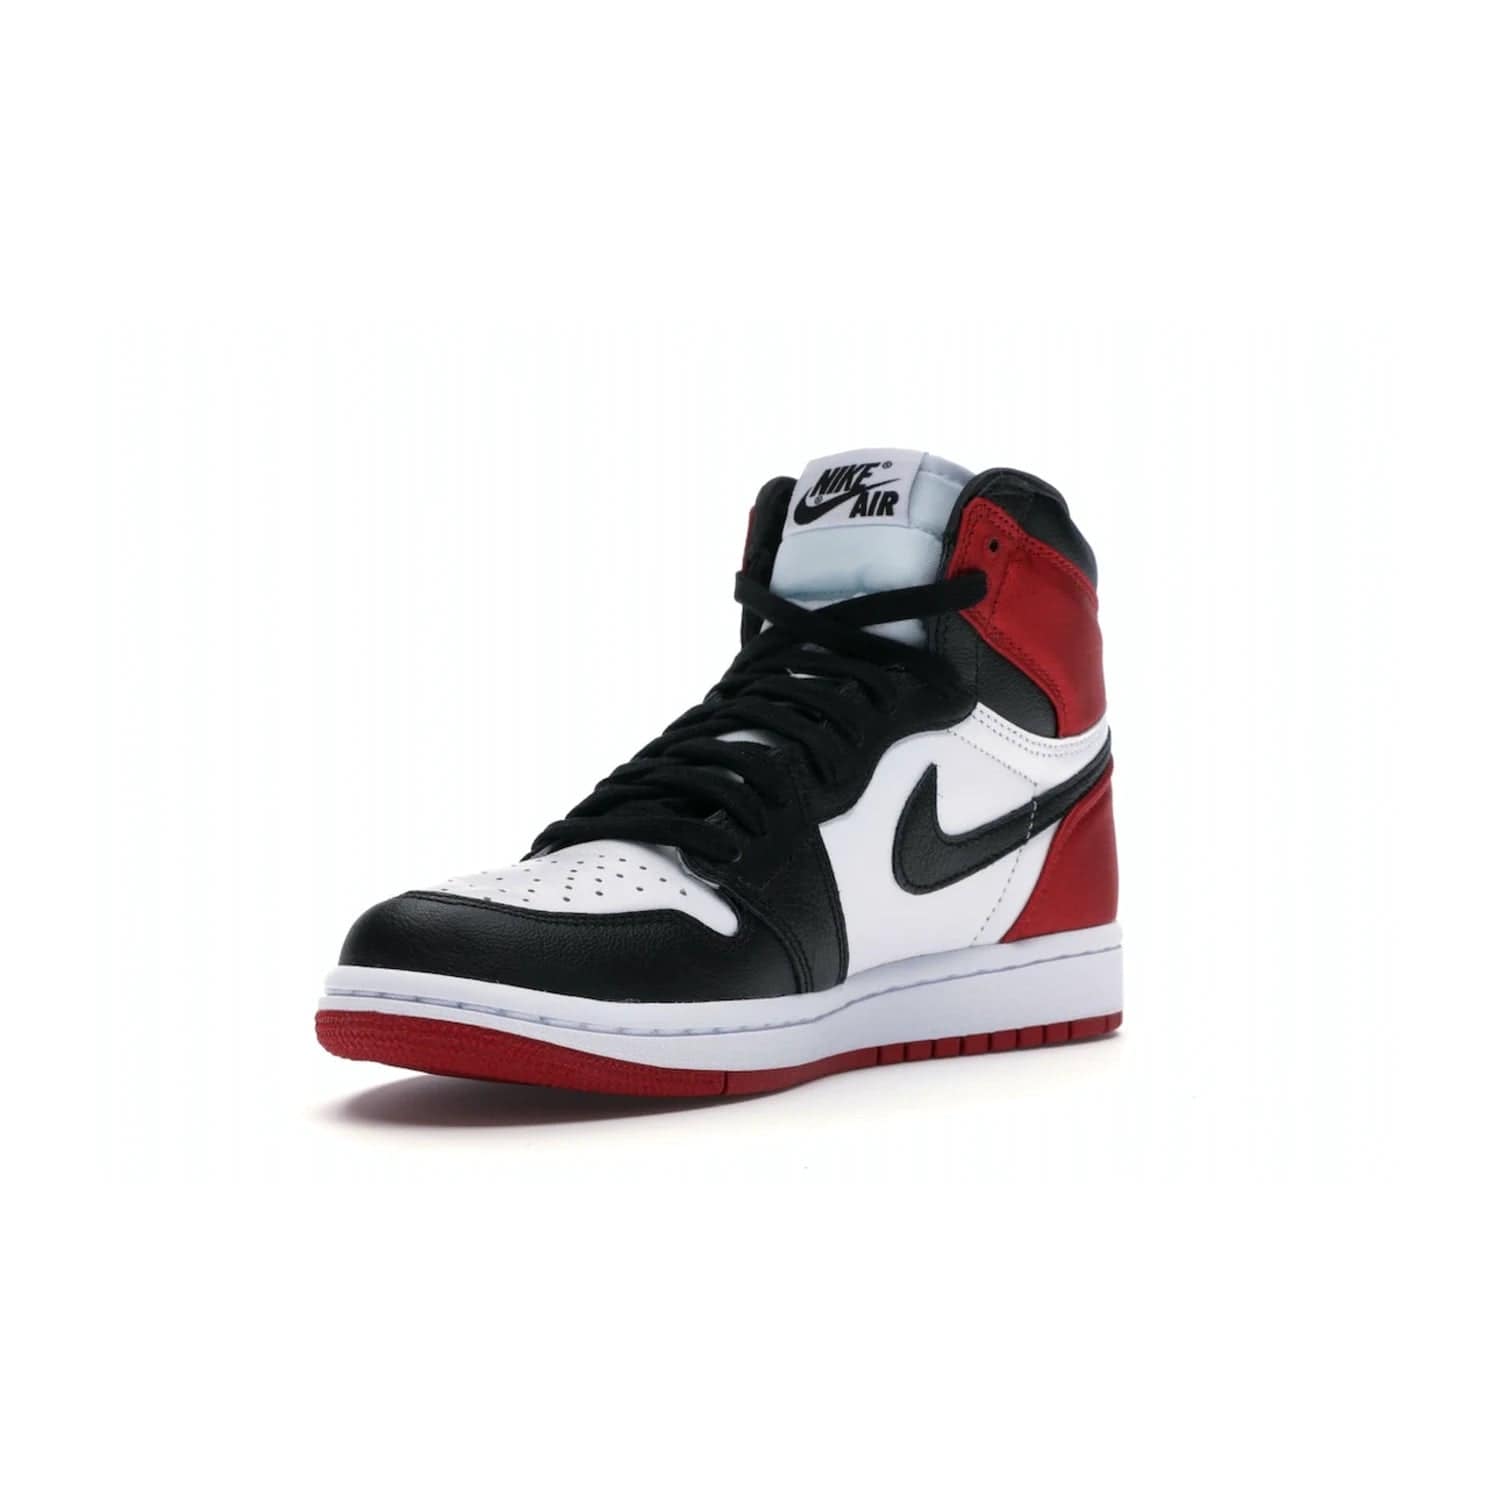 Jordan 1 Retro High Satin Black Toe (Women's) - Image 14 - Only at www.BallersClubKickz.com - Luxurious take on the timeless Air Jordan 1. Features a mix of black leather and satin materials with subtle University Red accents. Elevated look with metal Wings logo on the heel. Released in August 2019.